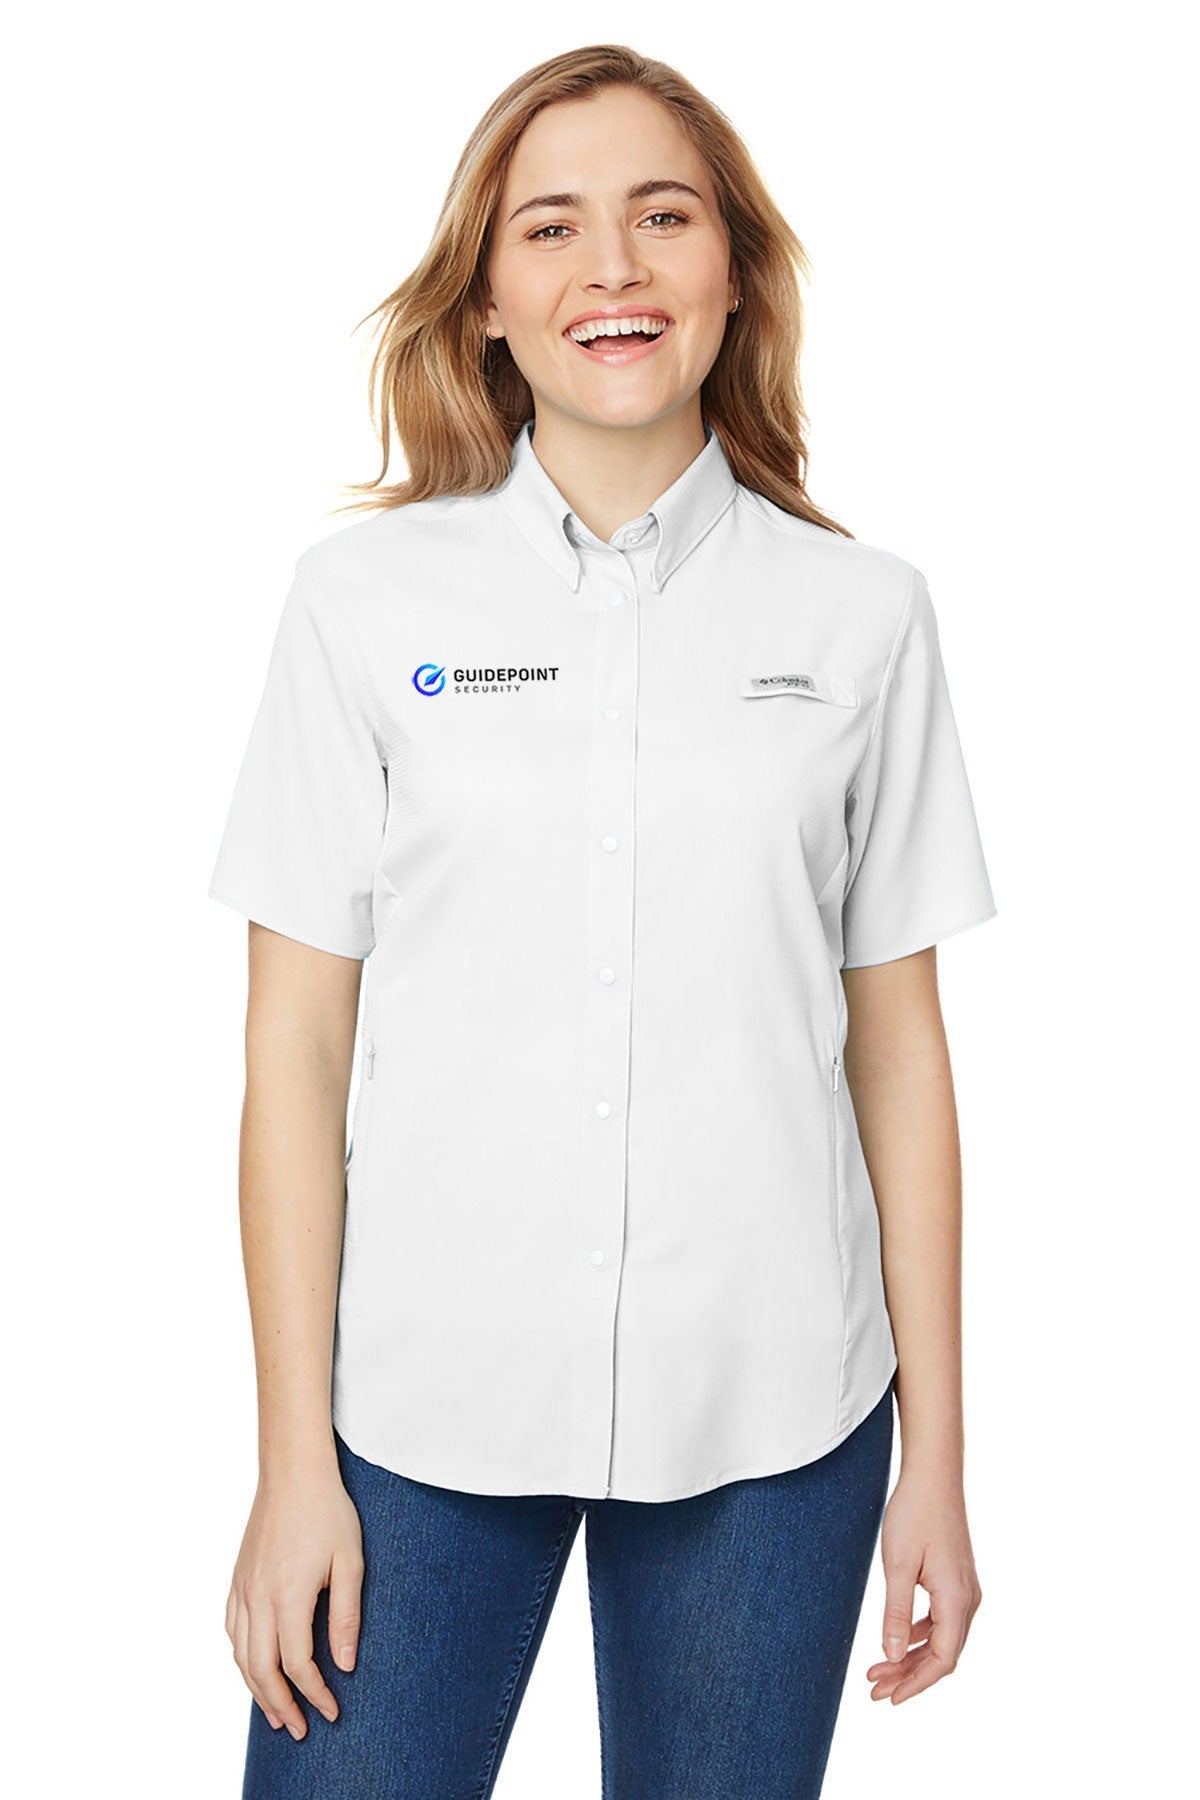 Columbia Ladies Tamiami II Short Sleeve Shirt, White [GuidePoint Security]